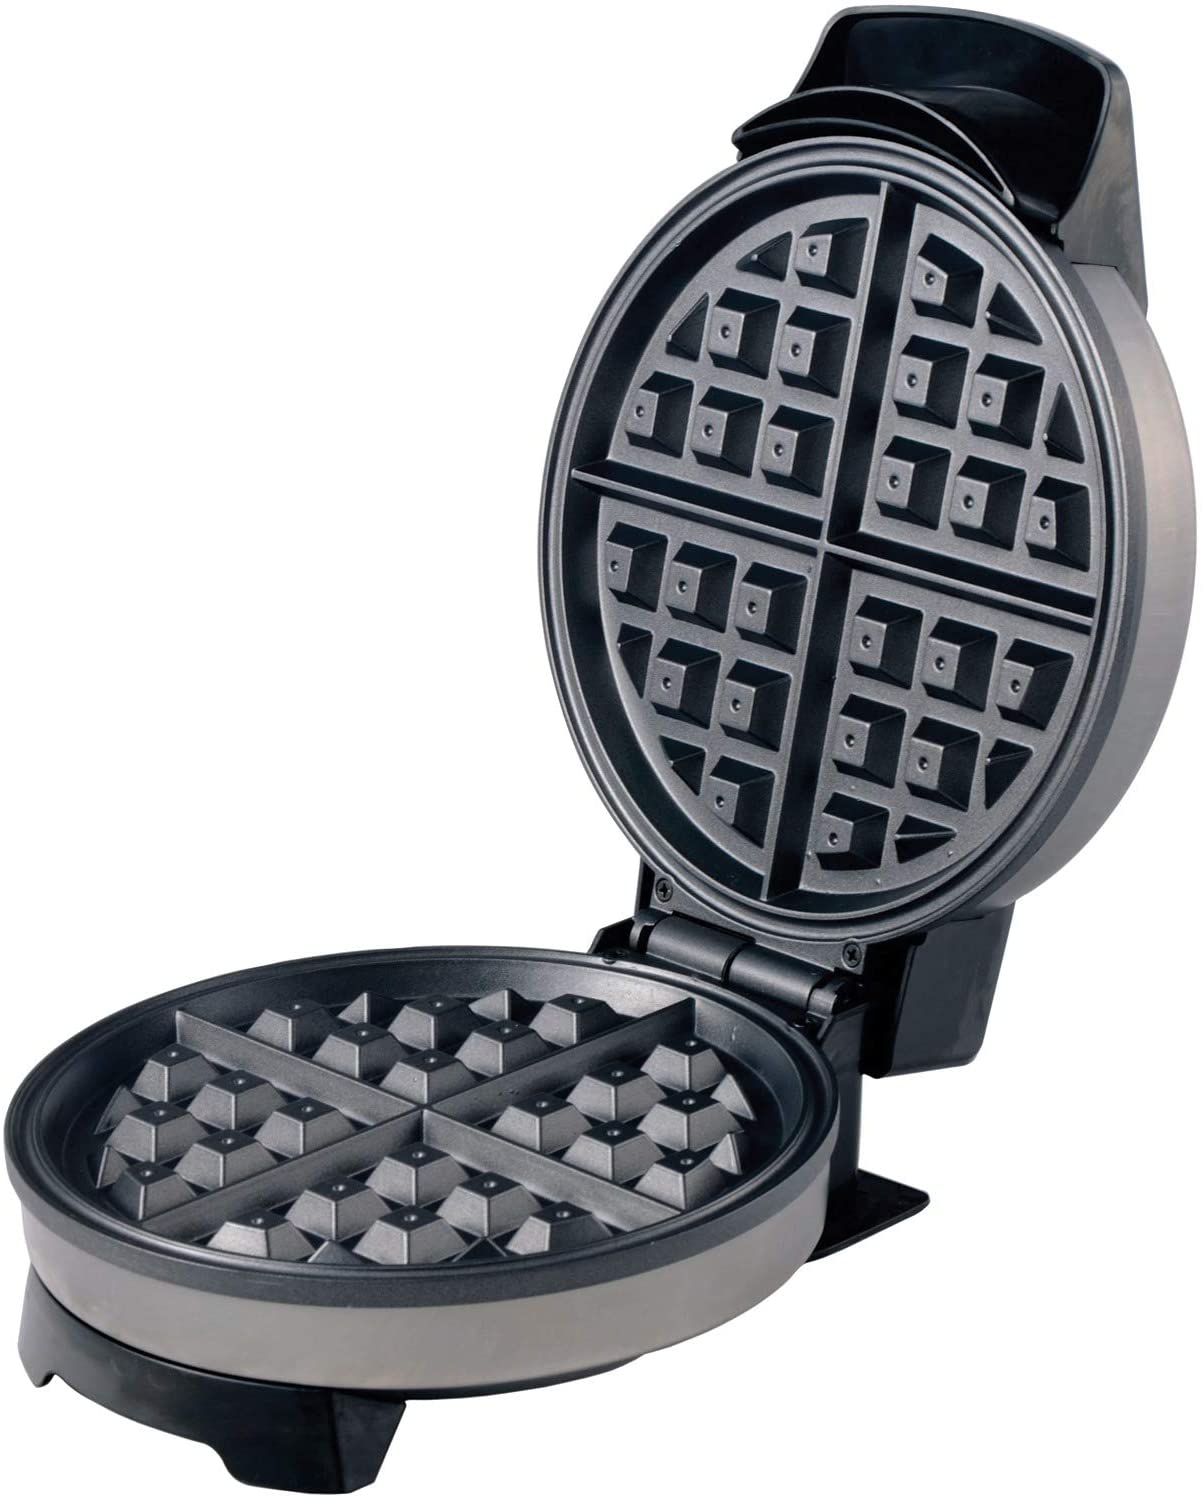 BRENTWOOD WAFFLE MAKER STAINLESS STEEL 